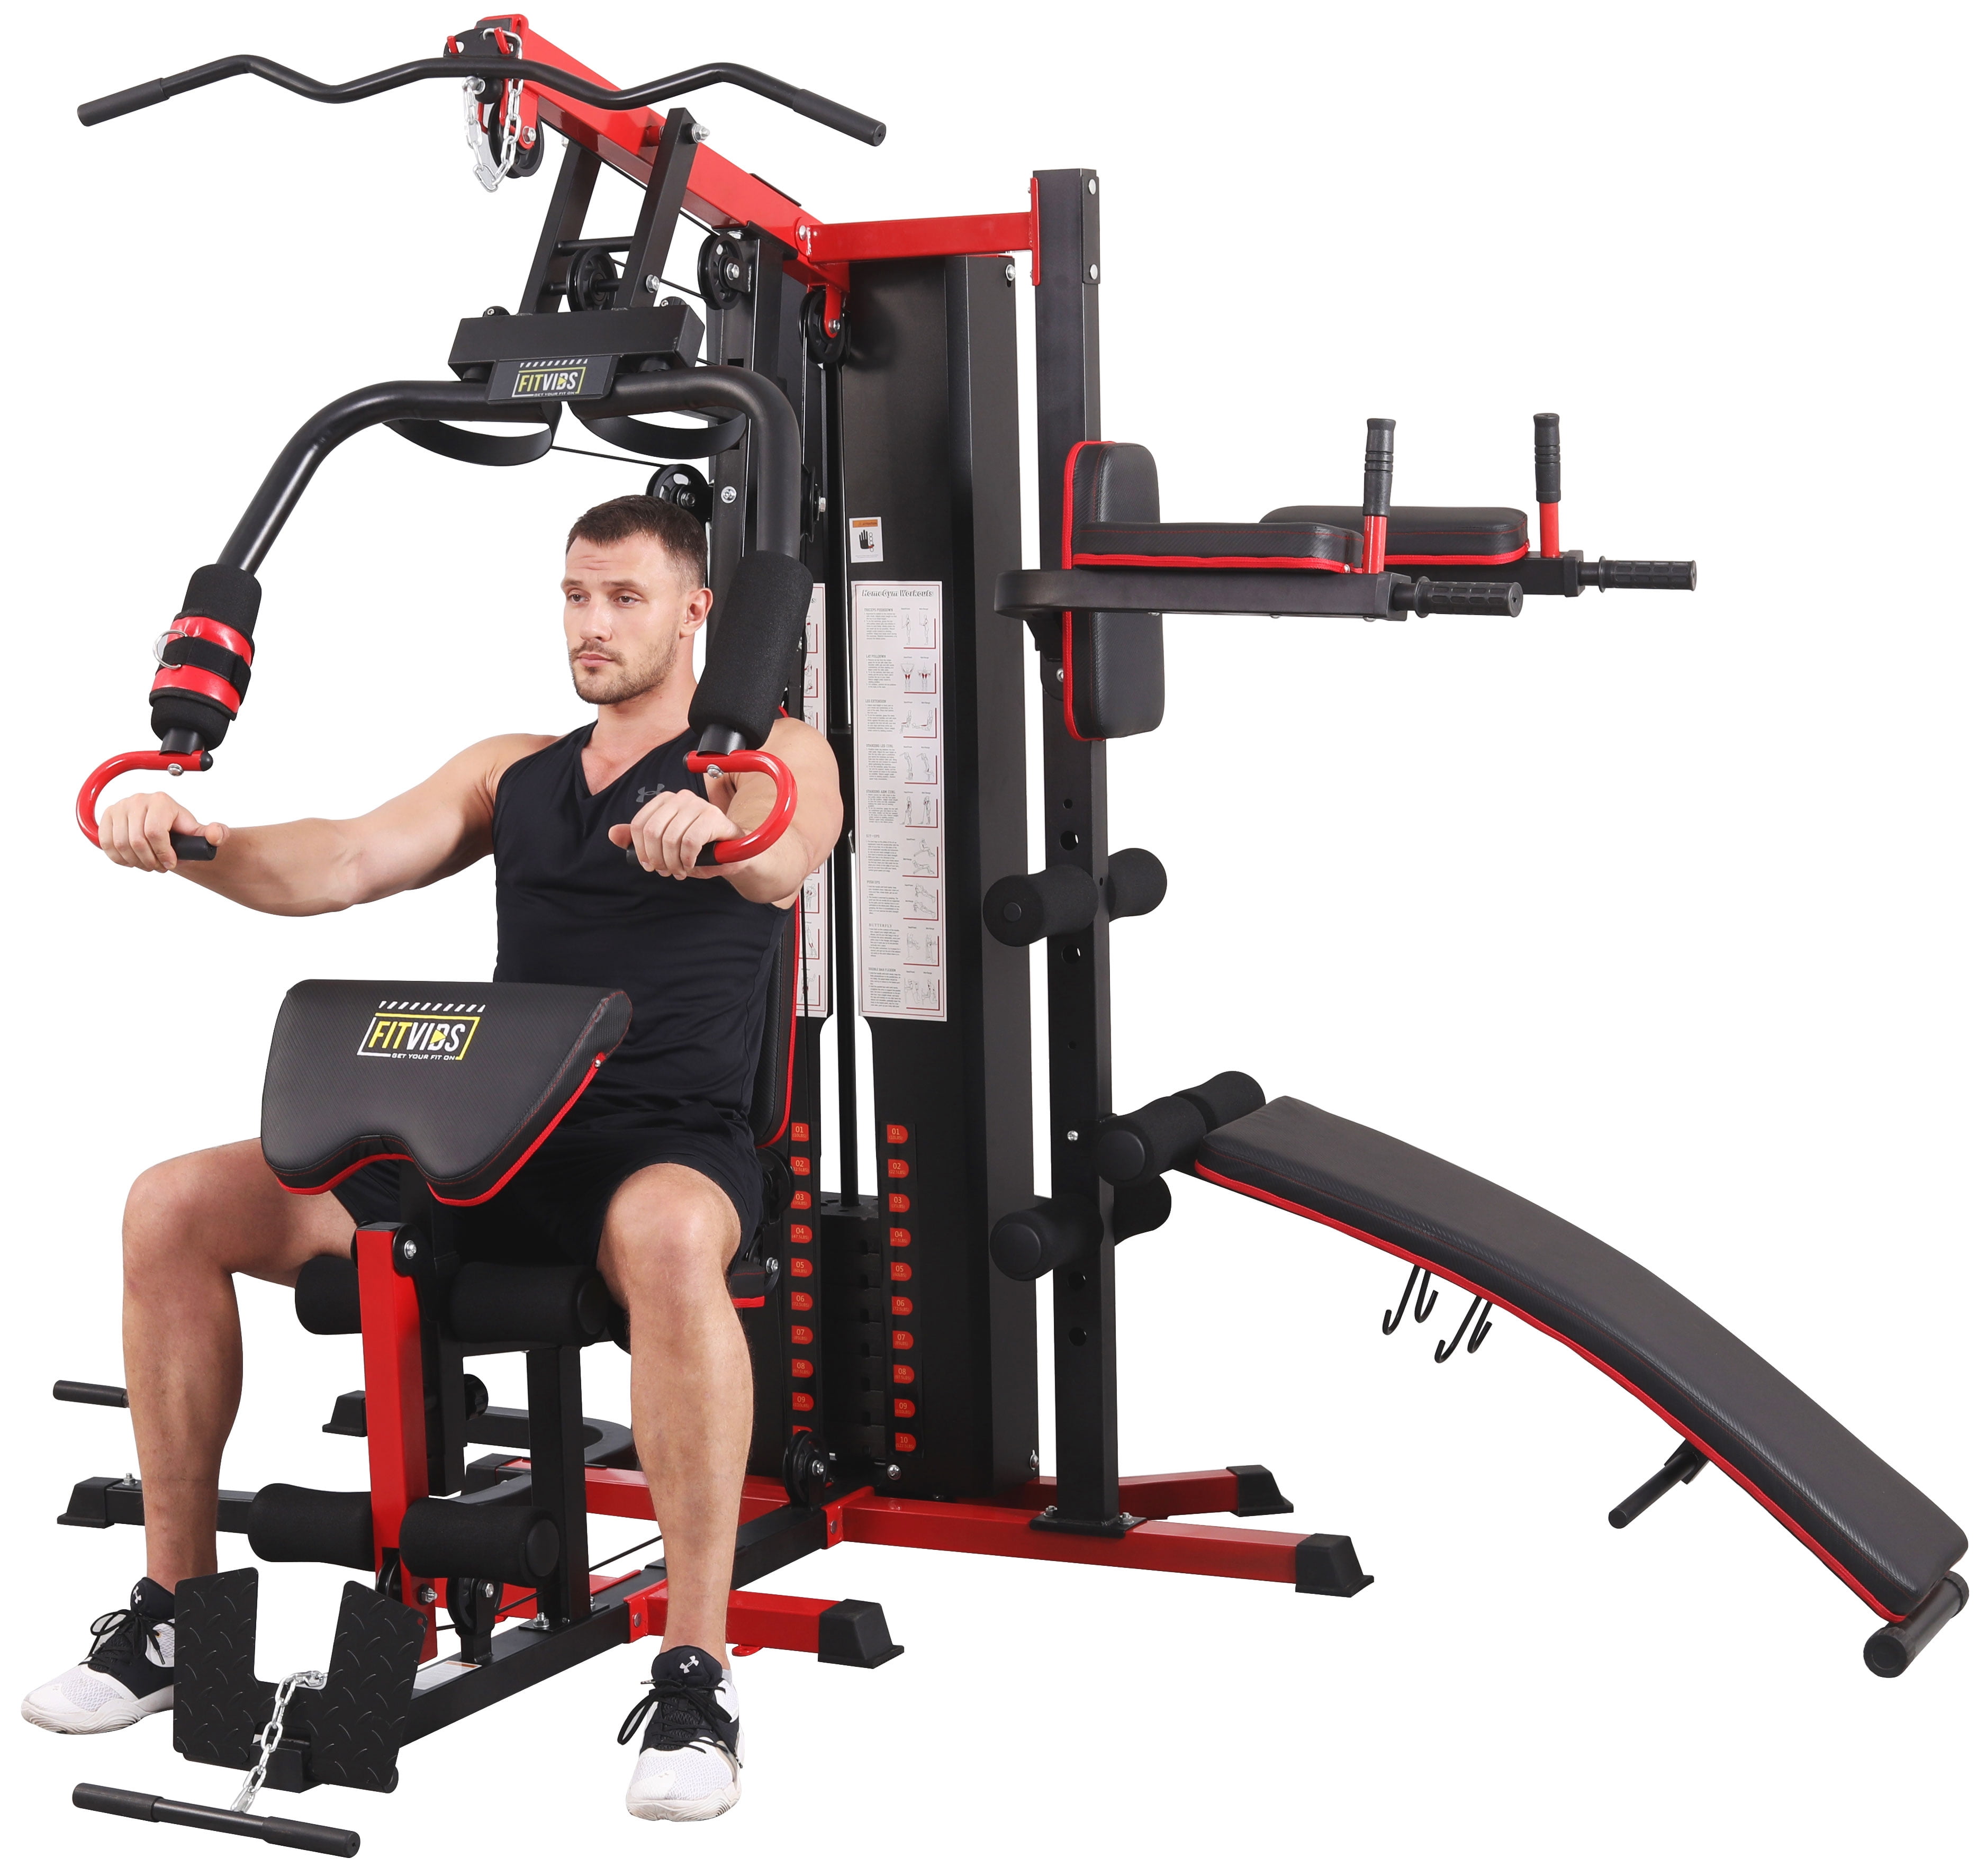 Fitvids LX900 Home Gym System Workout Station with 330 Lbs of Resistance,  122.5 Lbs Weight Stack, Three Station, Comes with Installation Instruction  Video, Ships in 7 Boxes 